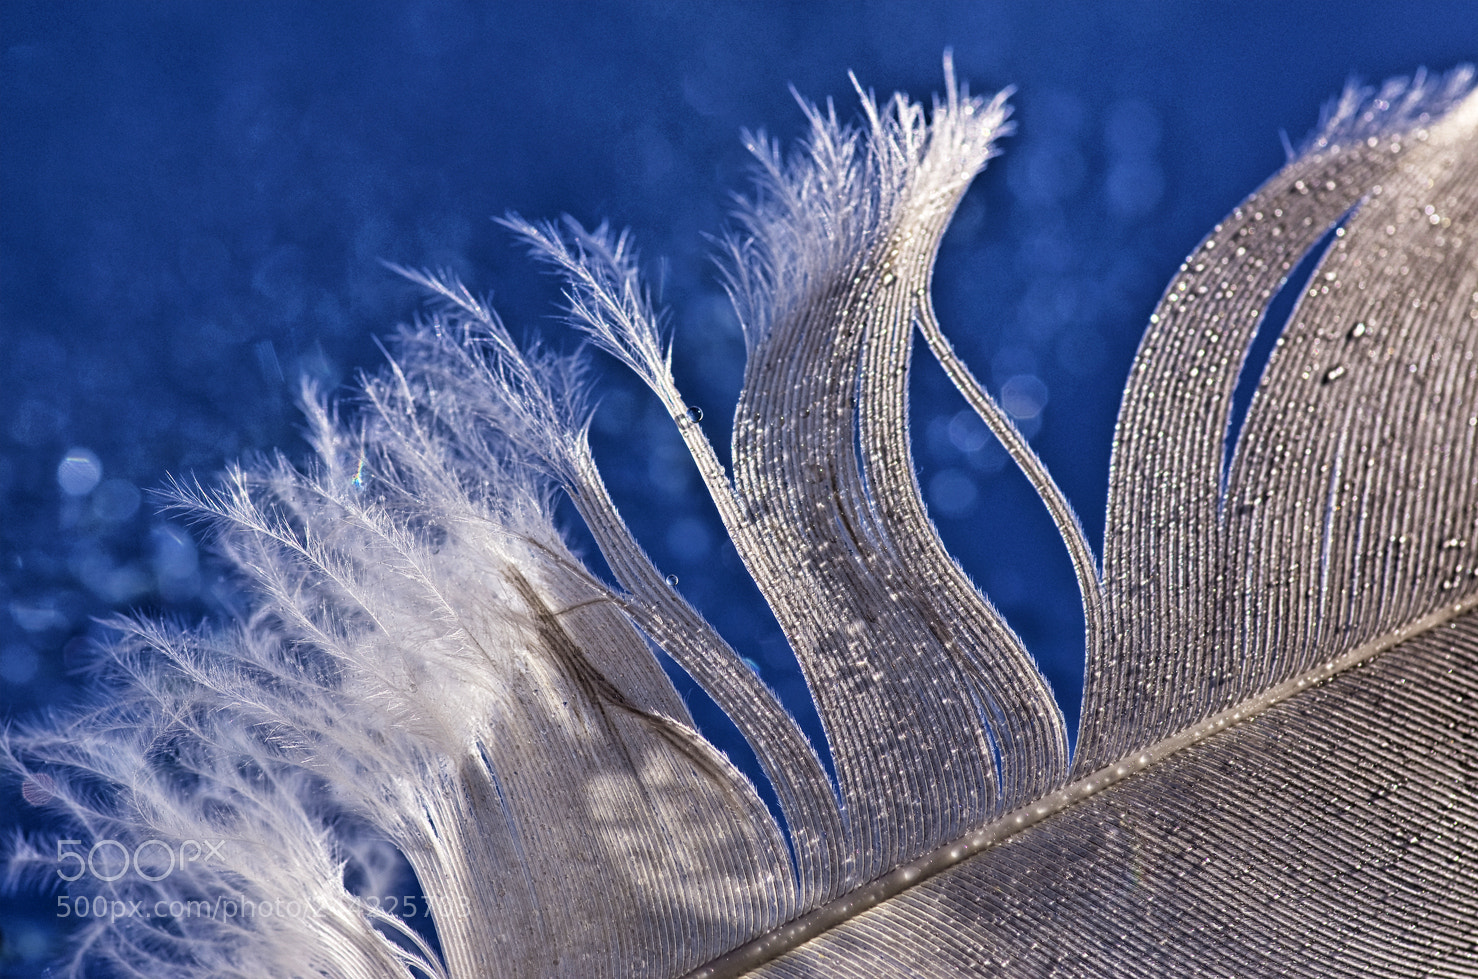 Pentax K-5 sample photo. Feather photography